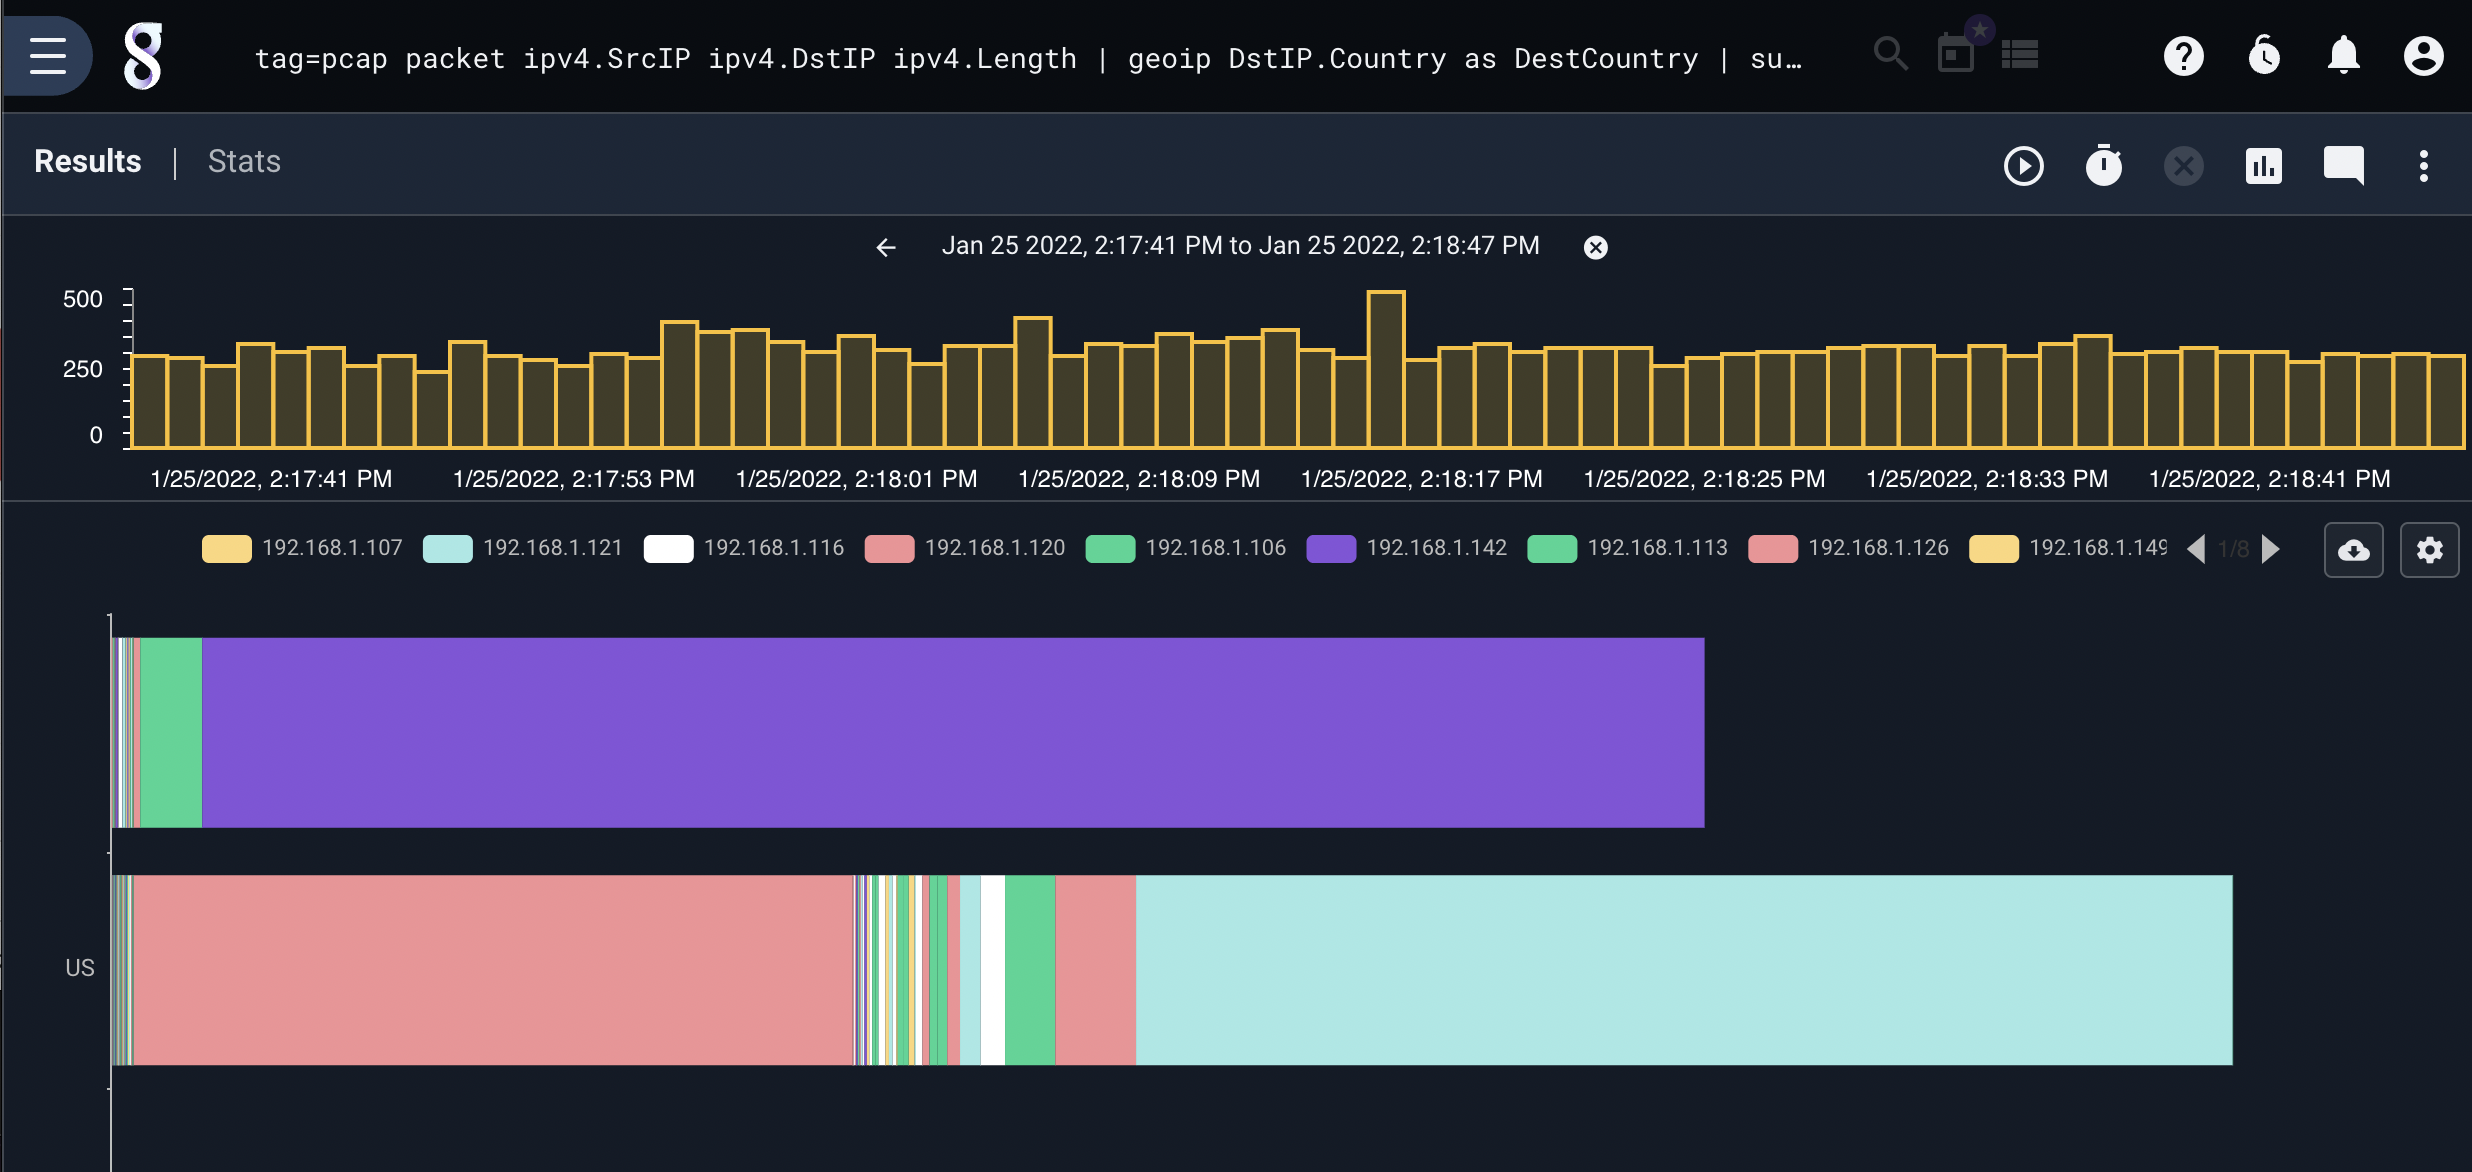 stackgraph of traffic to country by IP